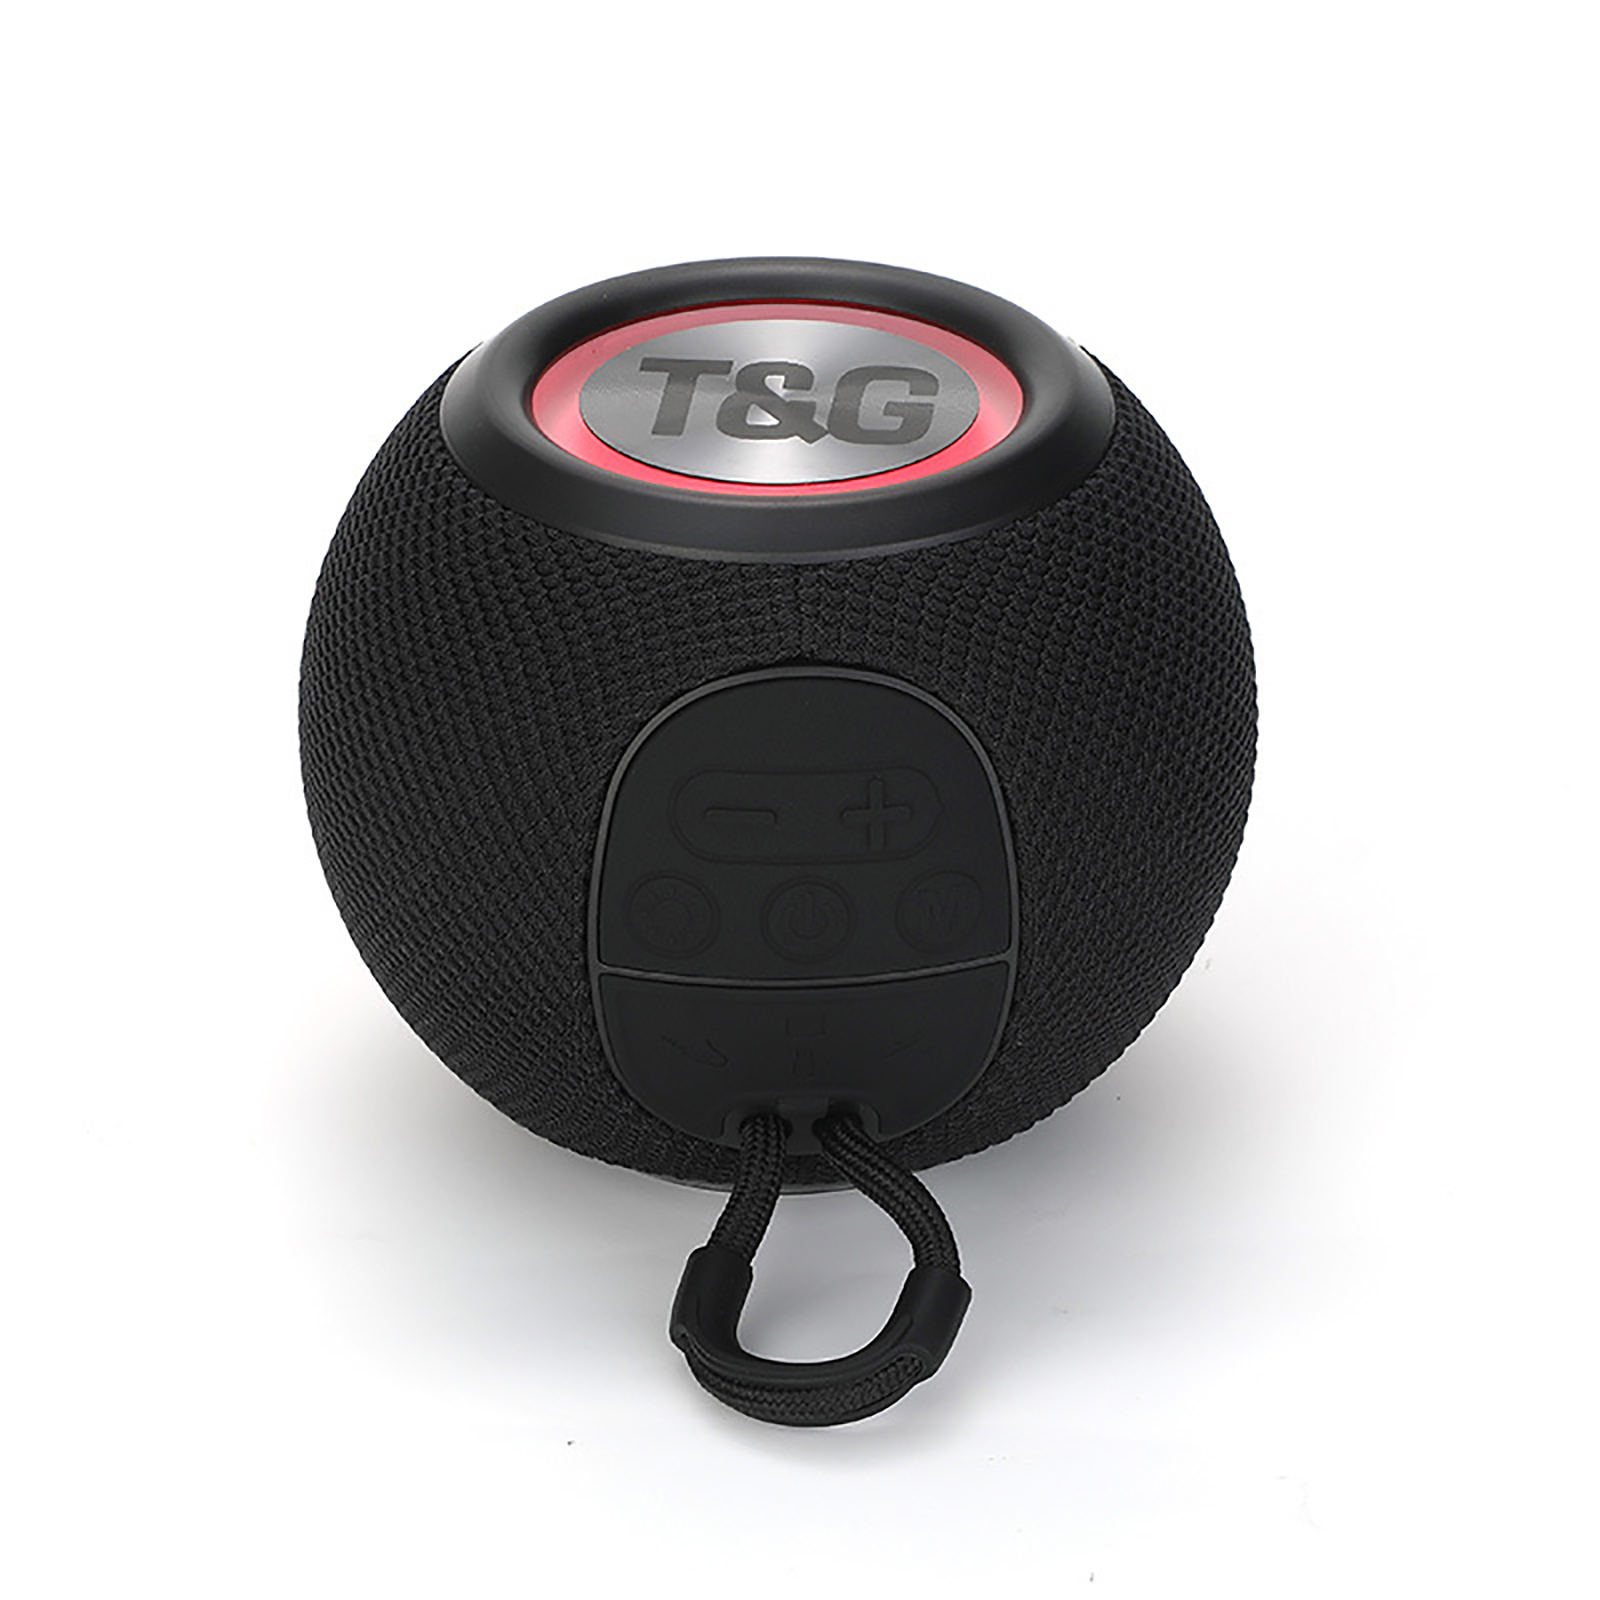 TG337 Wireless Speaker Portable Speaker Powerful Sound 57MM Horn Driver Speaker With Color Lights Micro SD USB AUX Player For Home Kitchen Outdoor Travelling